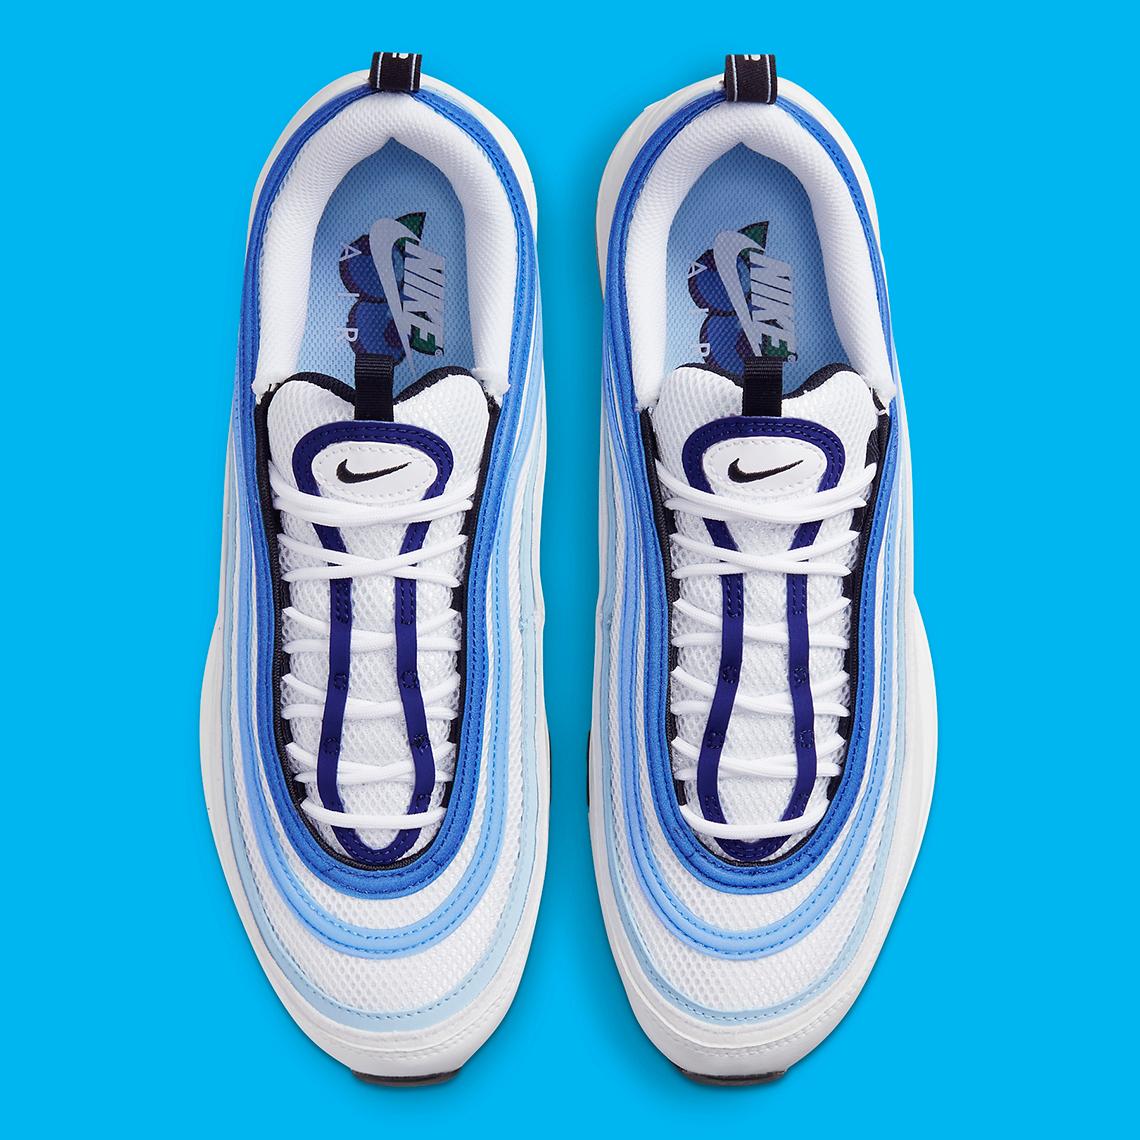 Nike Air Max 97 Blueberry Do8900 100 Release Date 5